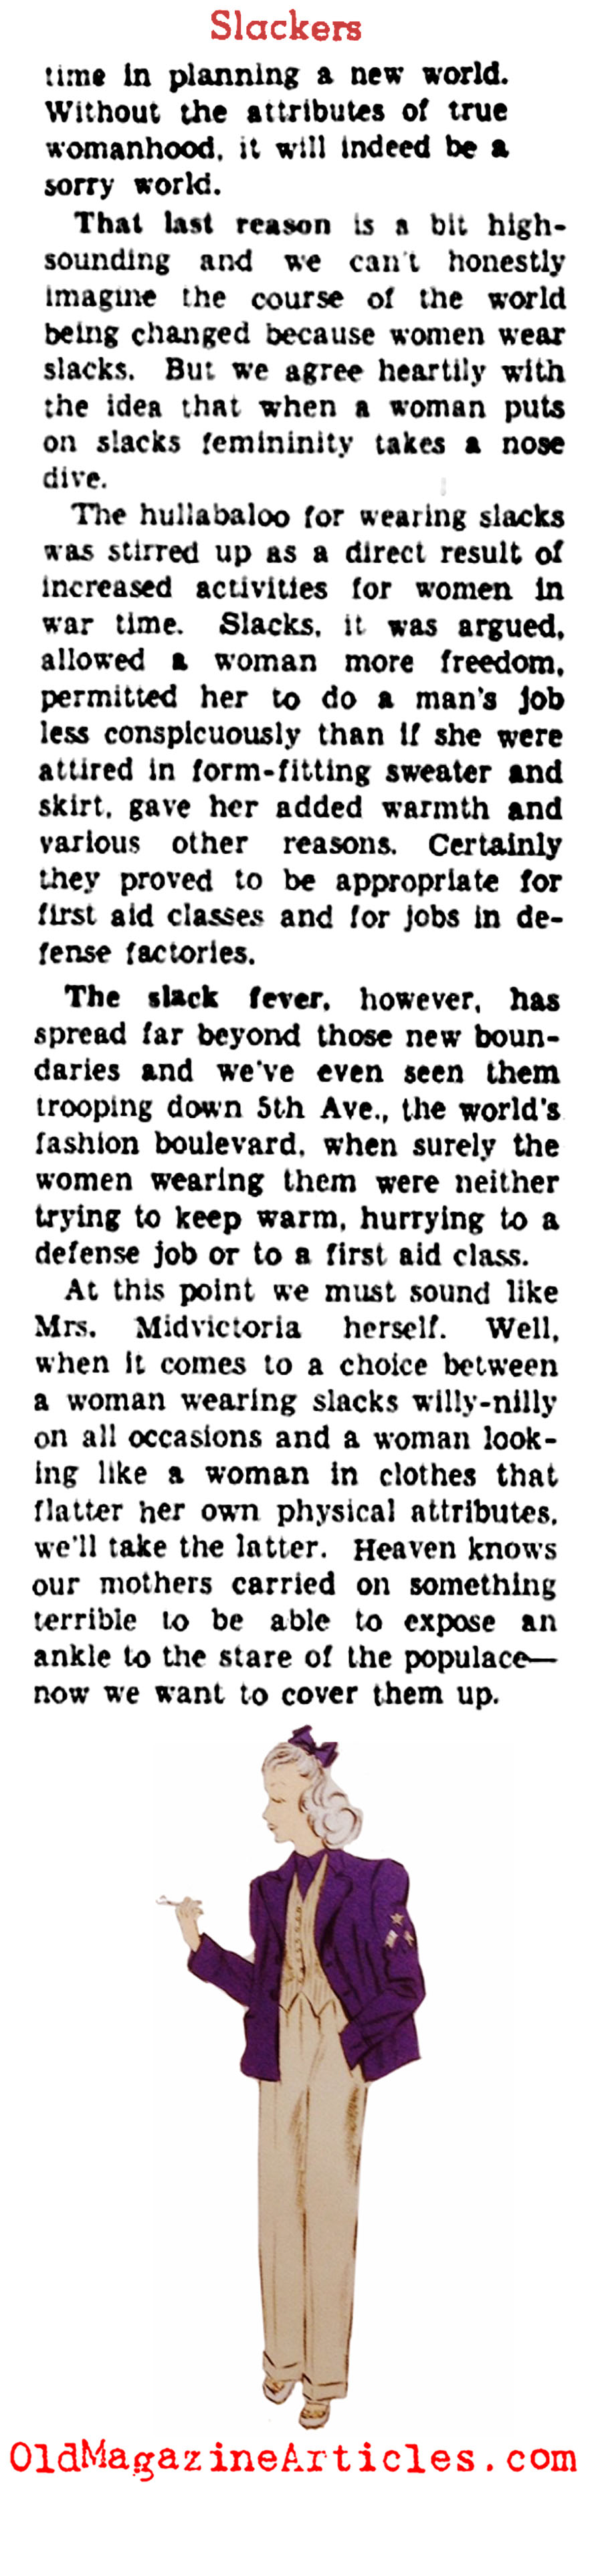 A Smaller War on the Home Front (Brooklyn Eagle, 1942)